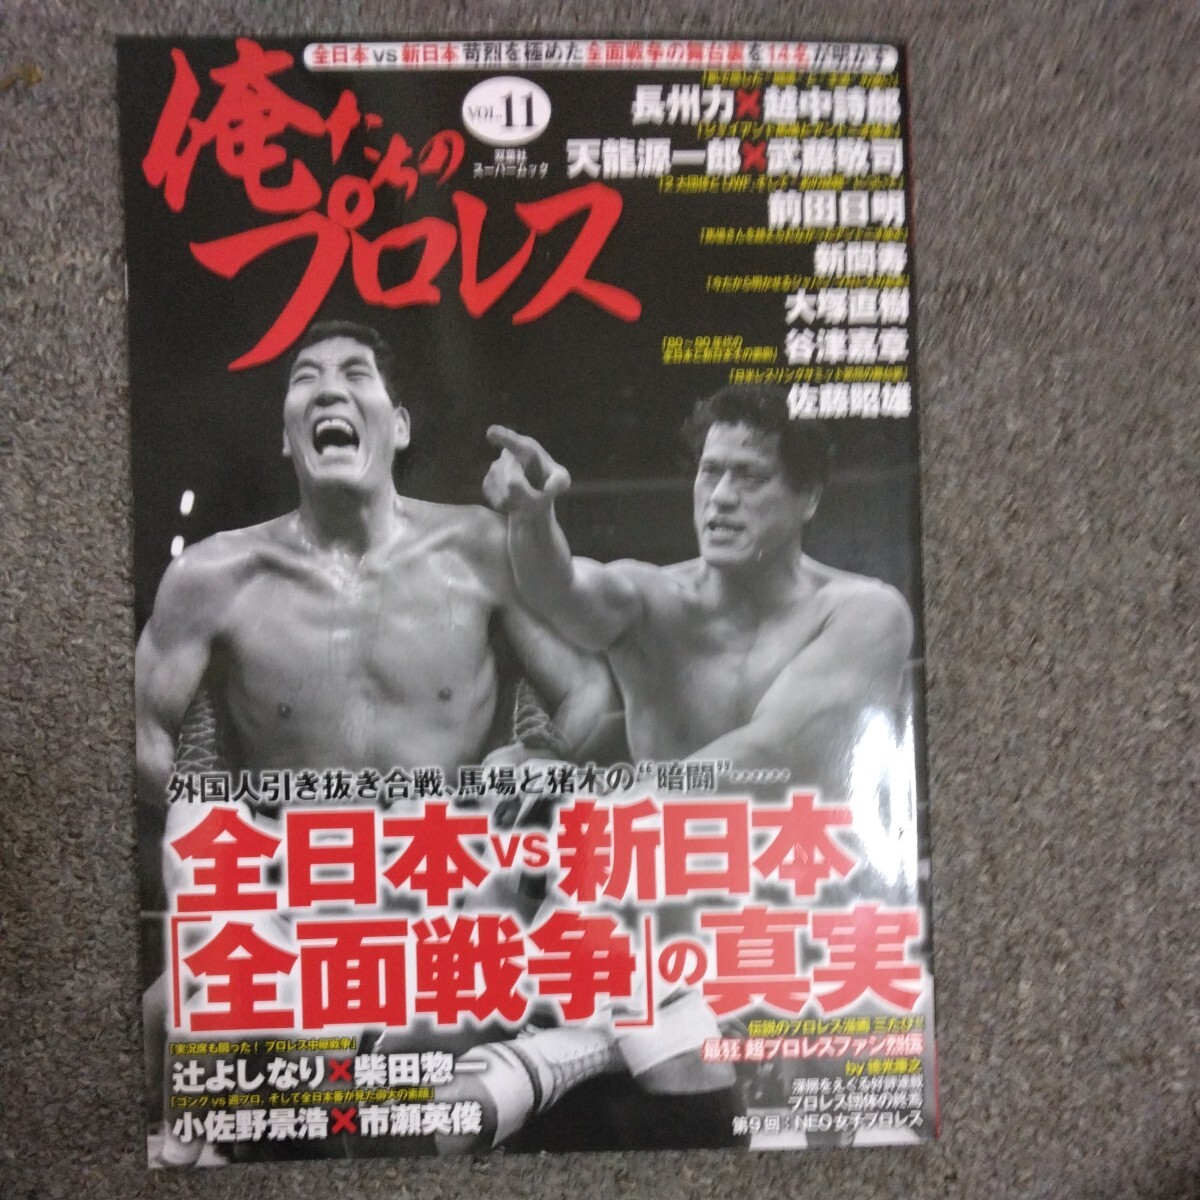  Me ... Professional Wrestling VOL11 all Japan VS New Japan whole surface war. genuine real 